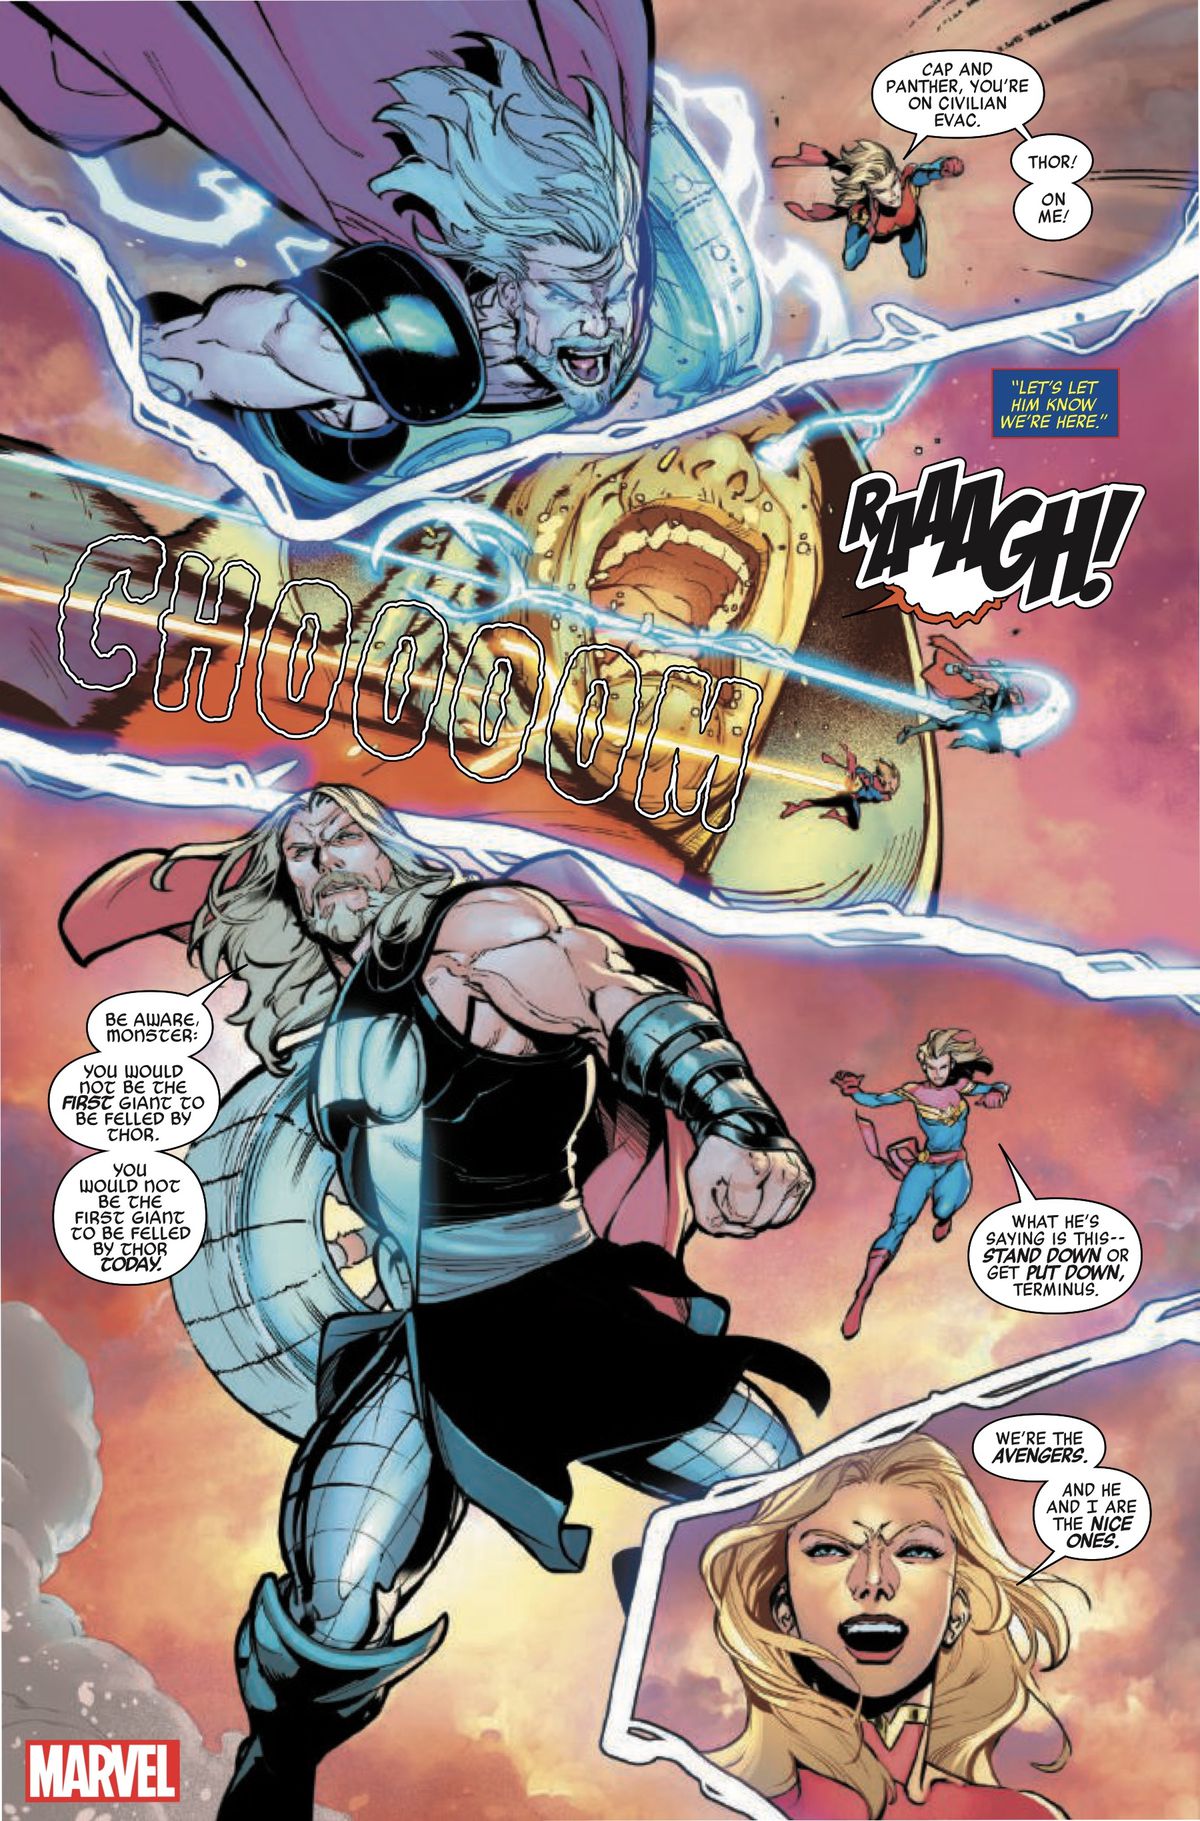 Captain Marvel and Thor battle the huge monster, striking it with lighting. “Be aware, monster,” says Thor. “You would not be the first giant to be felled by Thor today.” “We’re the Avengers,” Captain Marvel adds, “and he and I are the nice ones,” in Avengers #1 (2023).